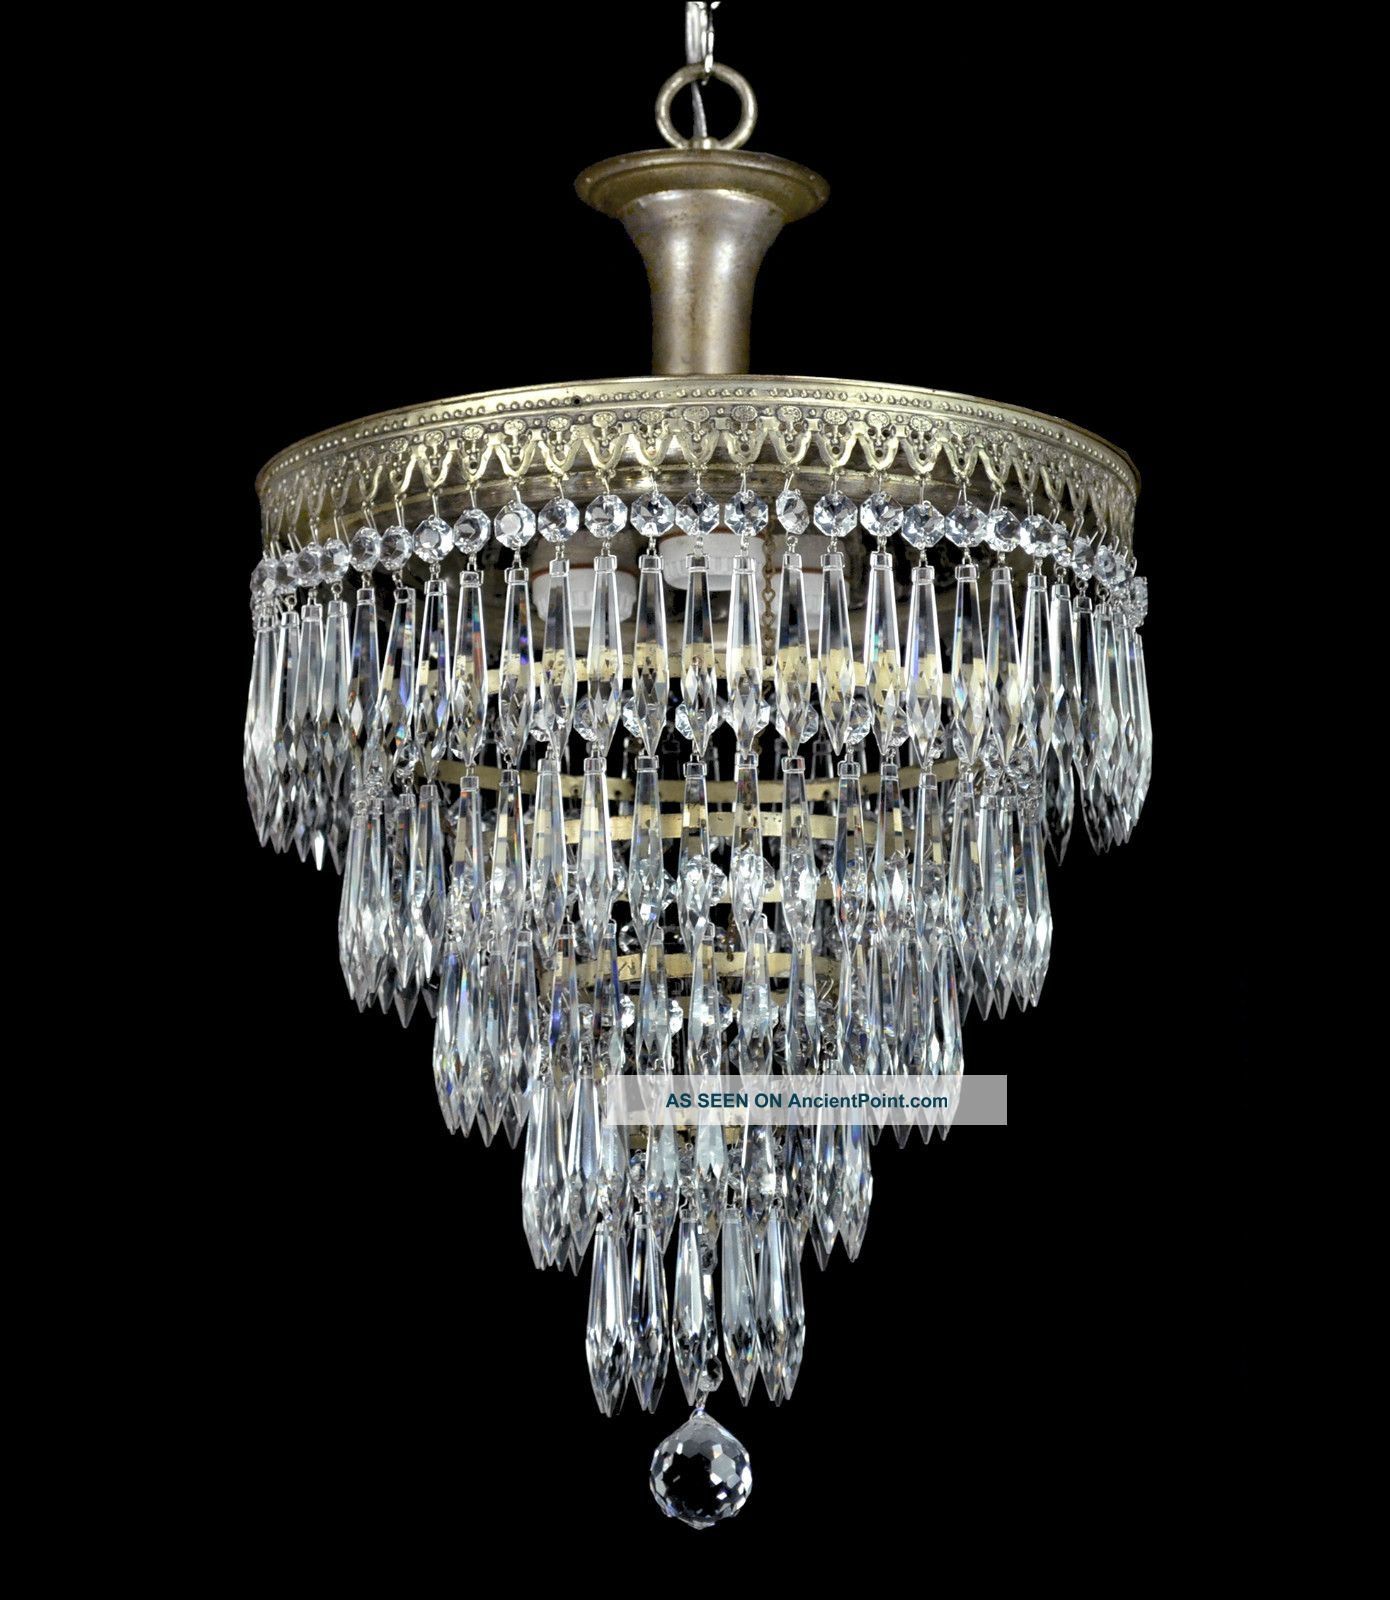 Vintage Wedding Cake Antique Chandelier Pendant Crystal Empire Art Inside Expensive Crystal Chandeliers (View 11 of 11)